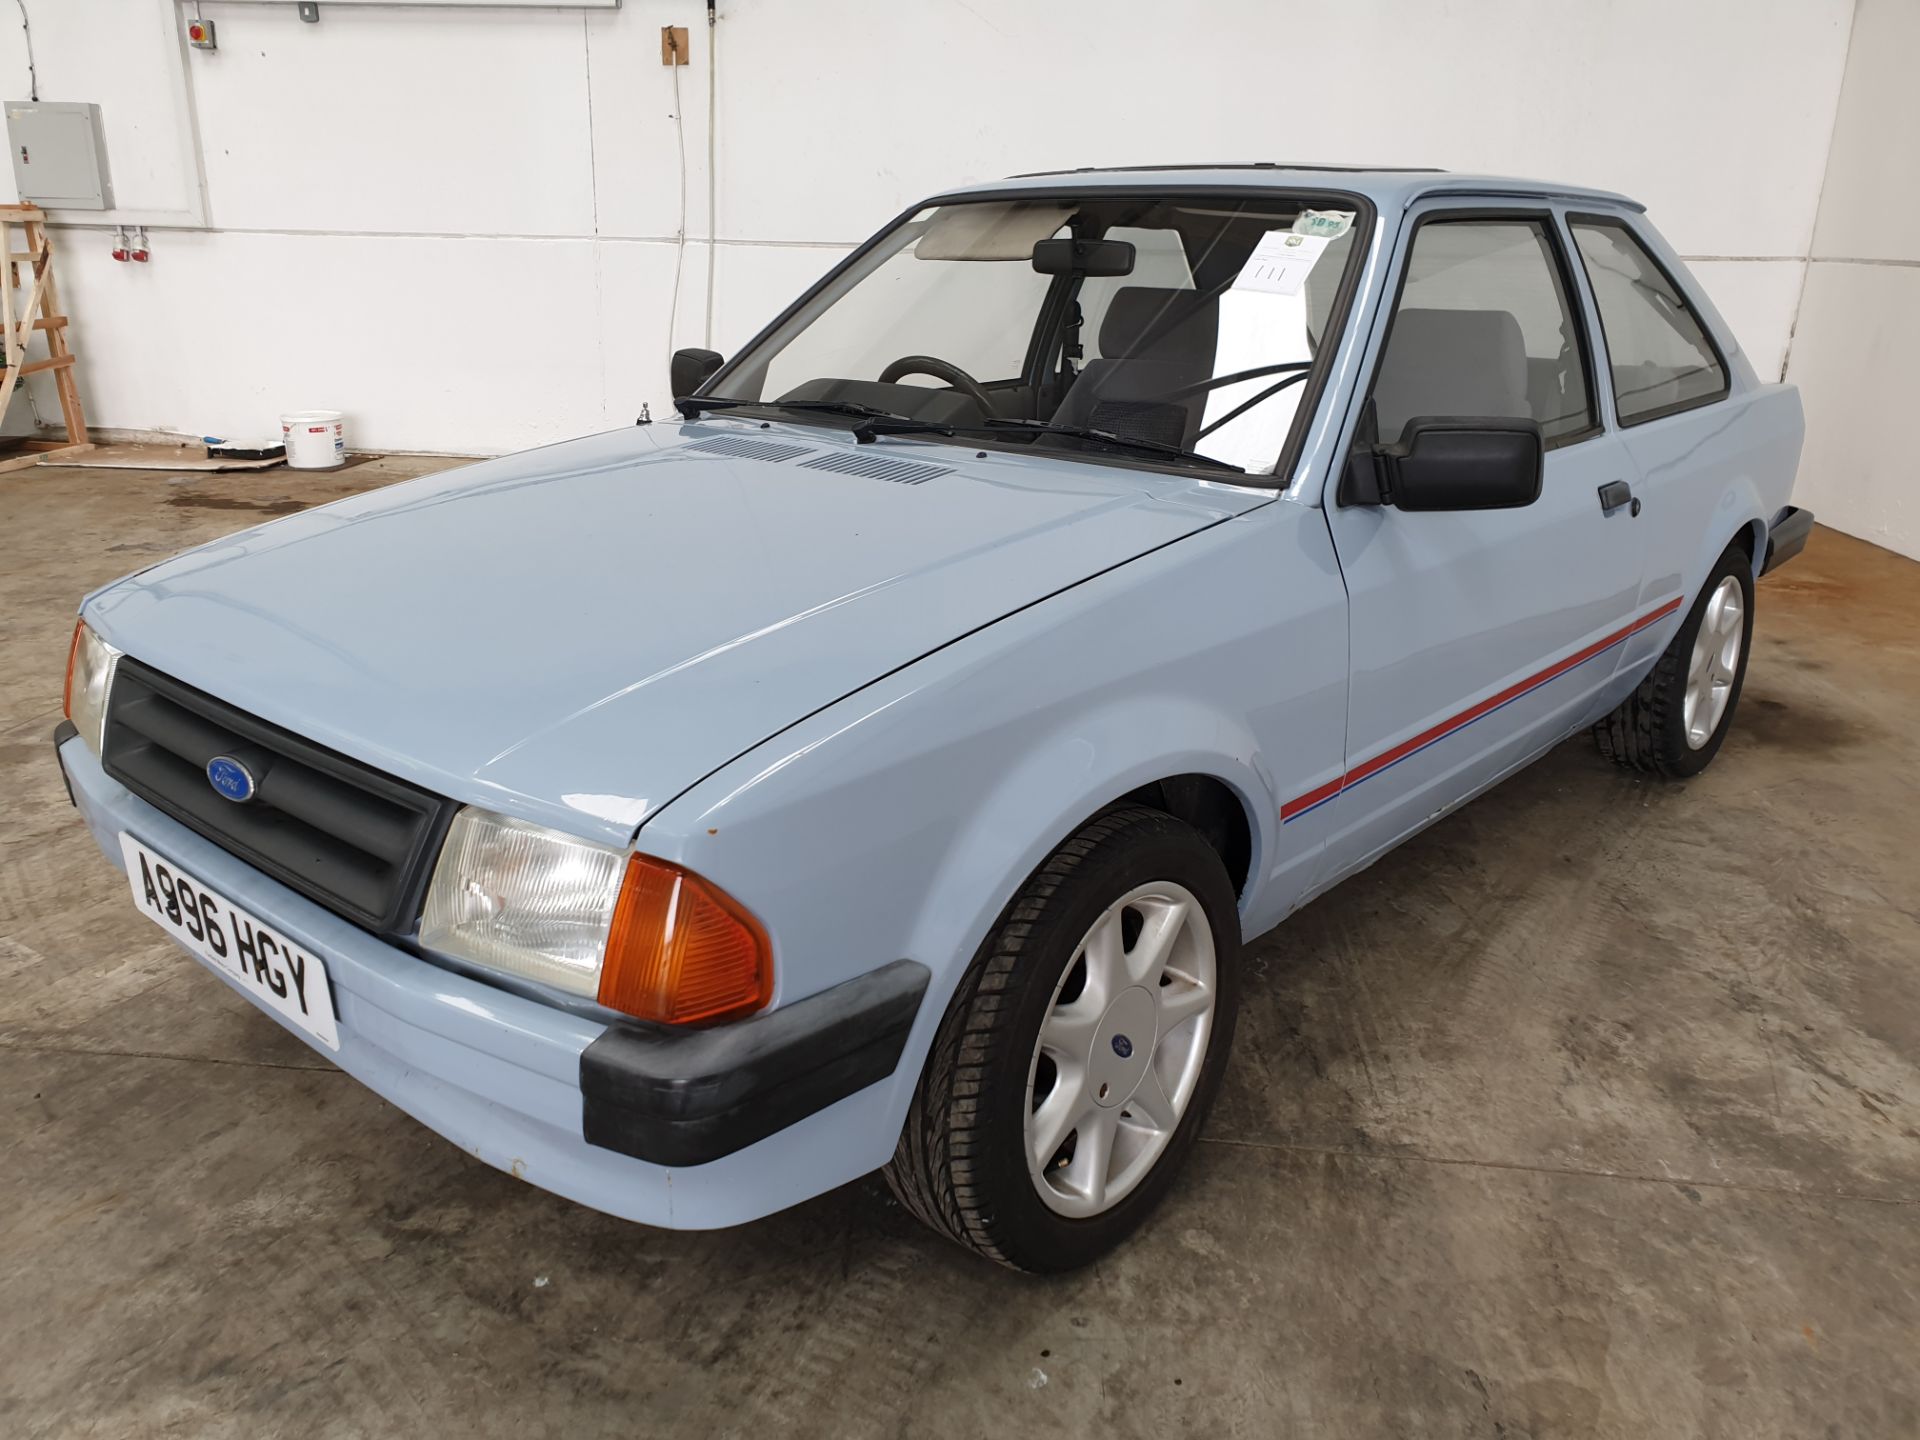 1984 Ford Escort 1100 3dr - Image 7 of 14